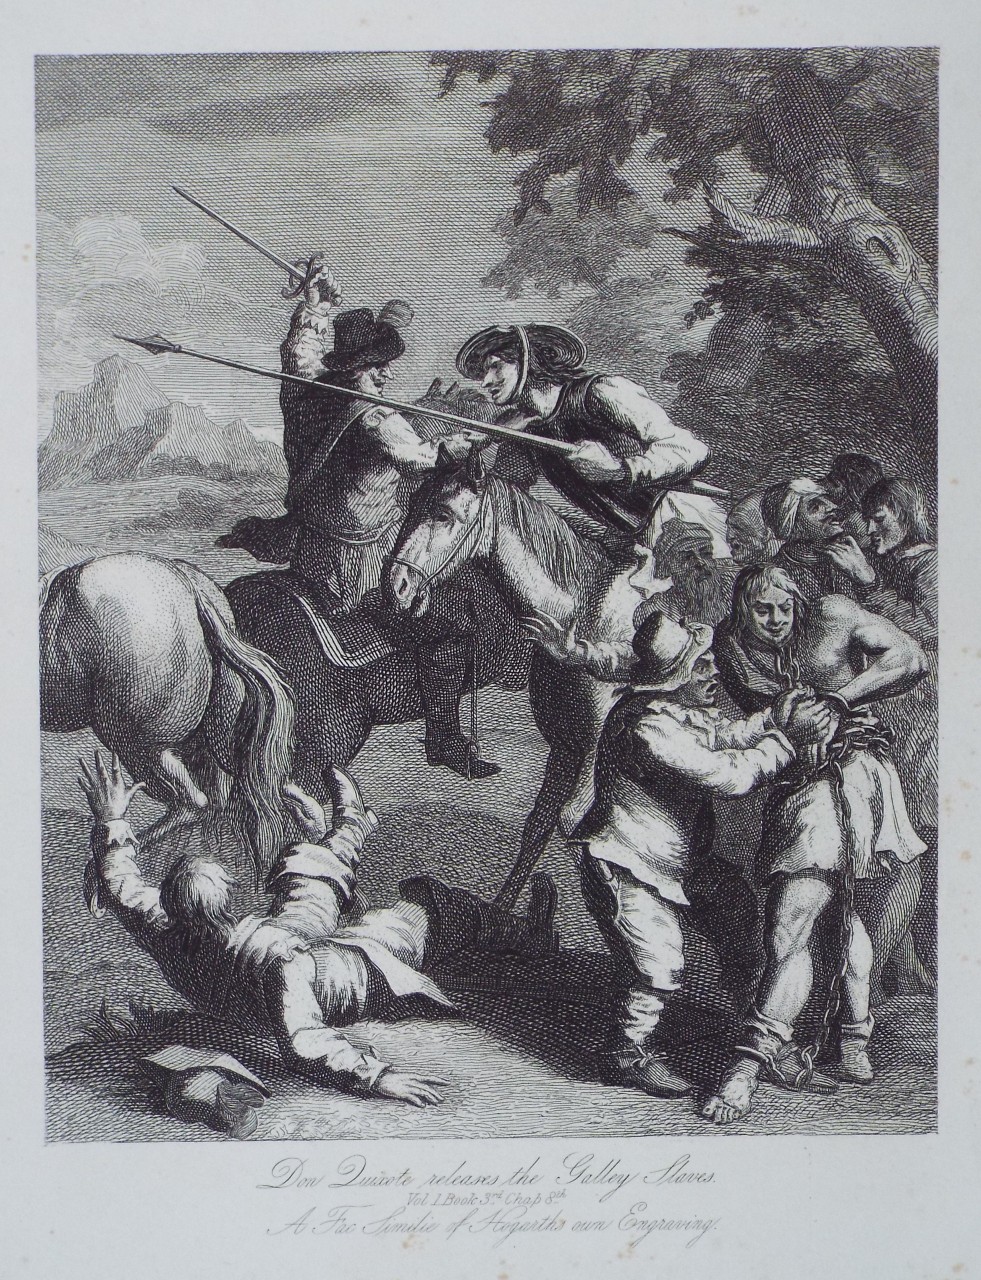 Print - Don Quixote releases the Galley Slaves. Vol. 1. Book 3rd. Chap 8th. A Fac Similie of Hogarth's own Engraving. 